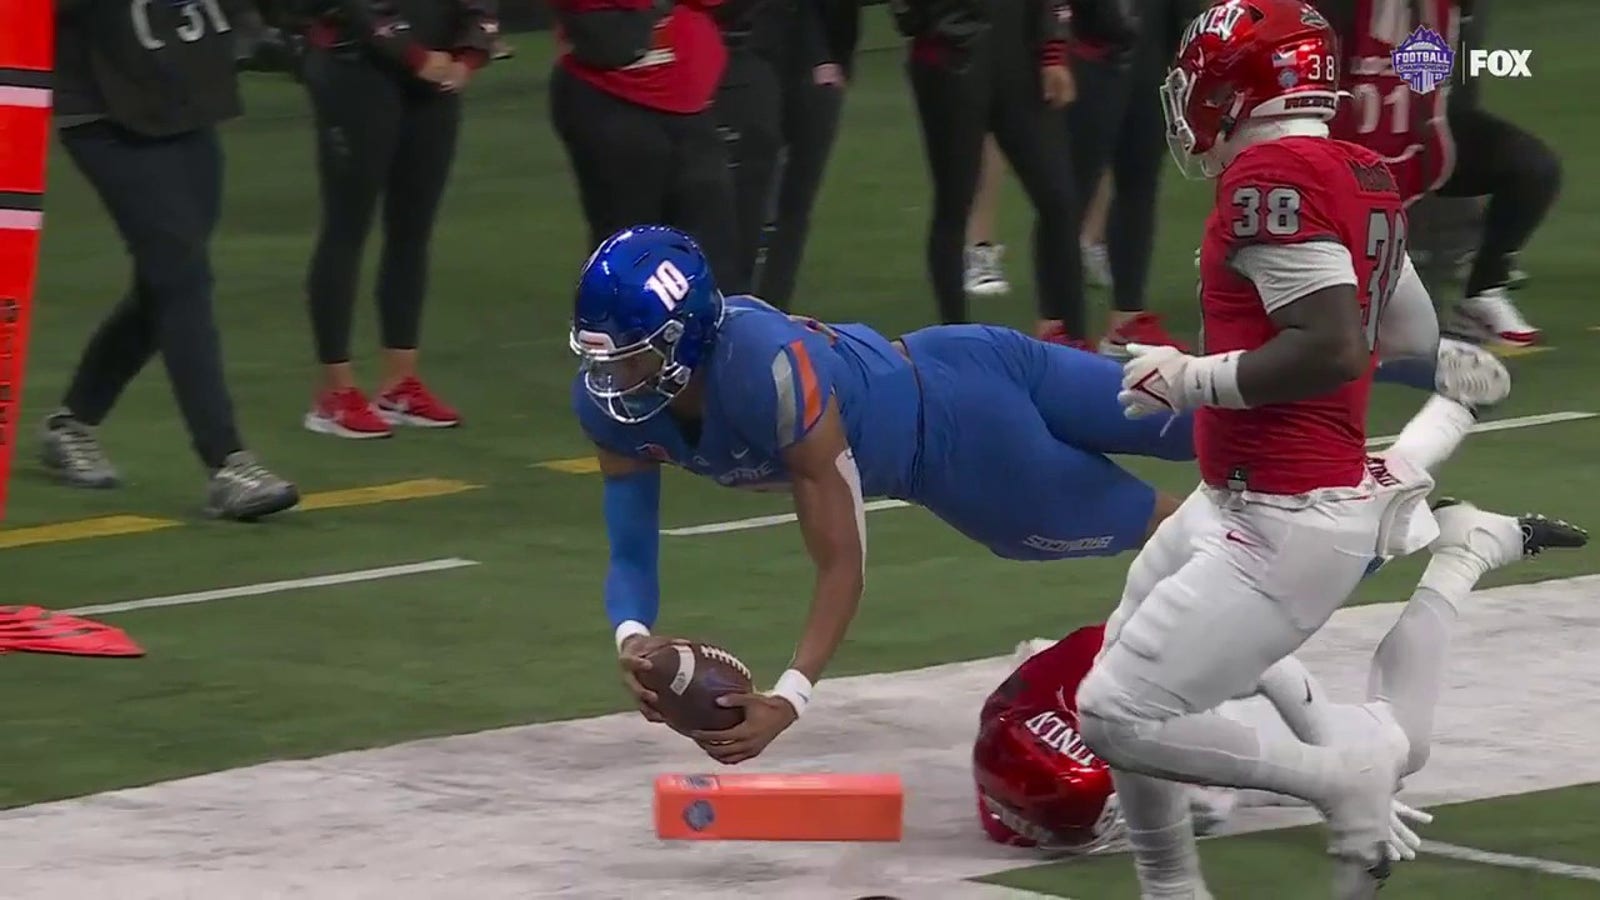 Taylen Green scrambles for a TD to give Boise State a 7-0 lead over UNLV